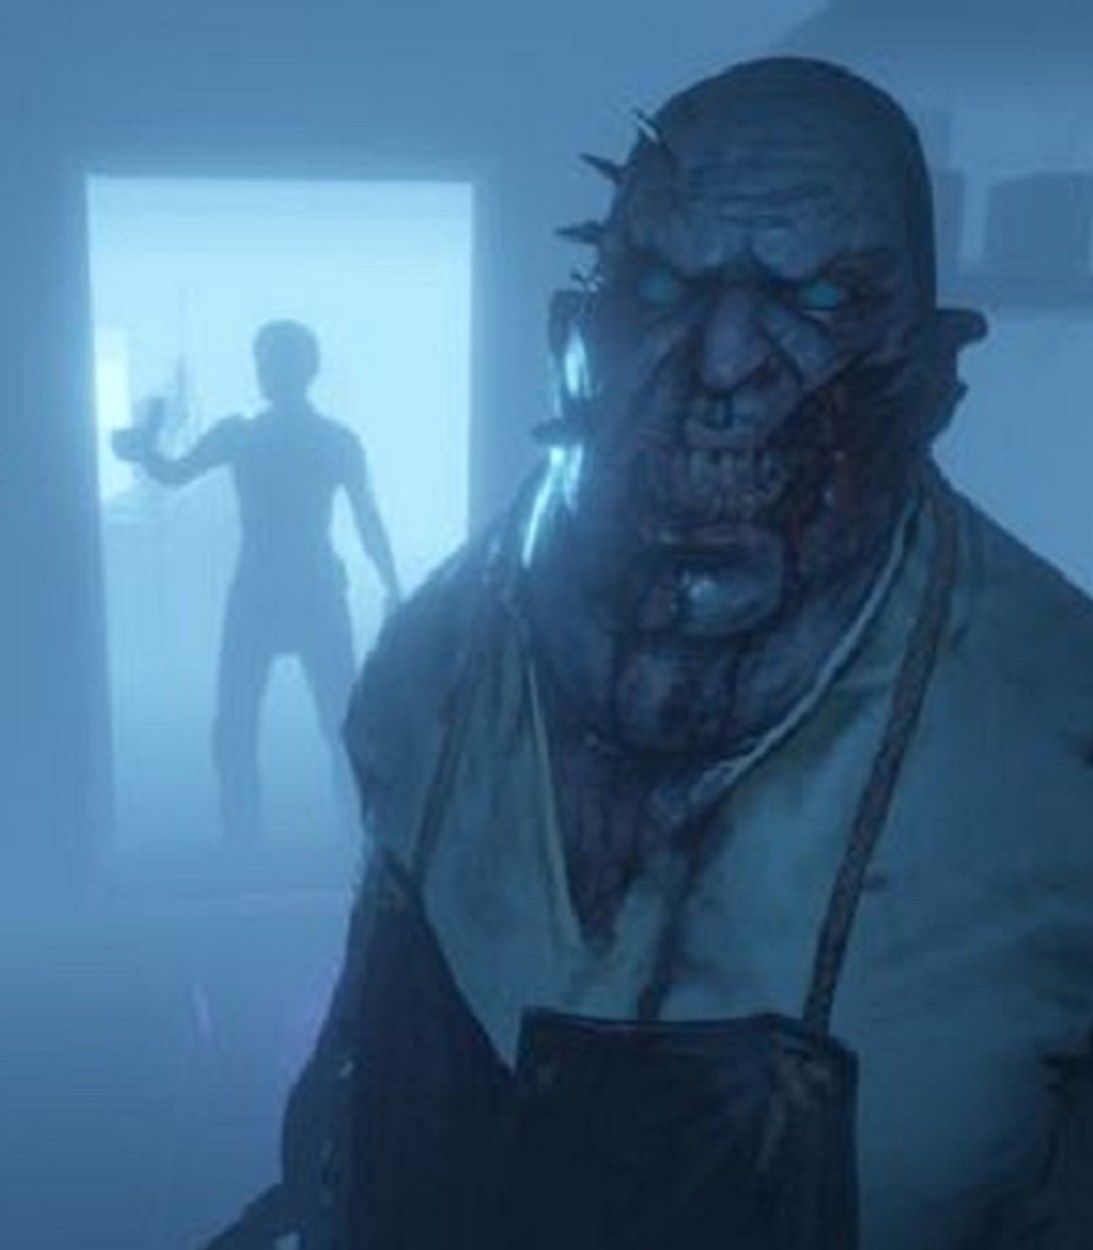 A player comes face-to-face with an angry ghost in Phasmophobia